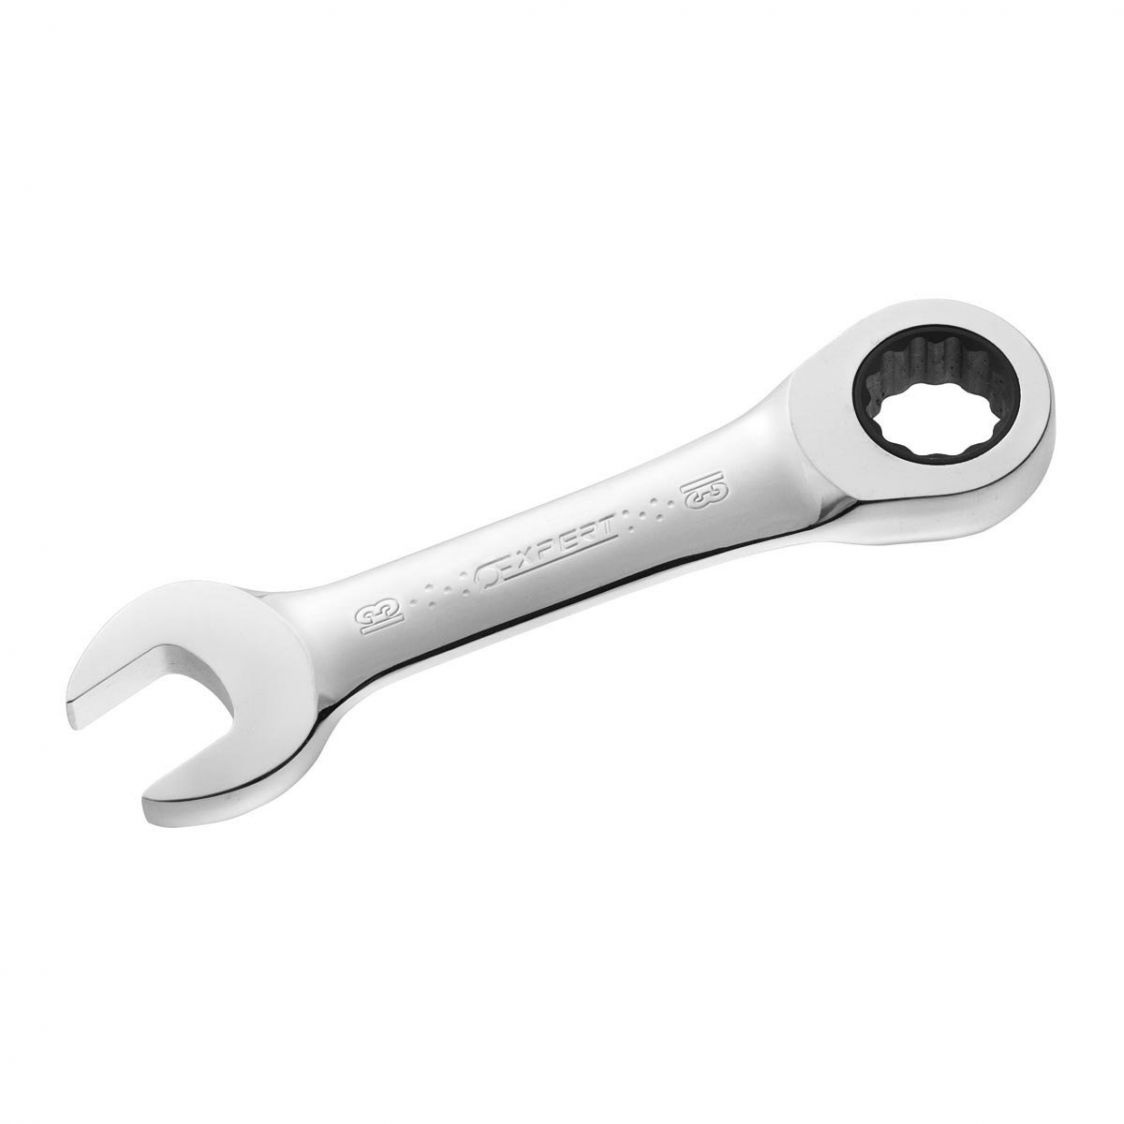 EXPERT by FACOM E110923 - 19mm Metric Stubby Ratchet Combination Spanner